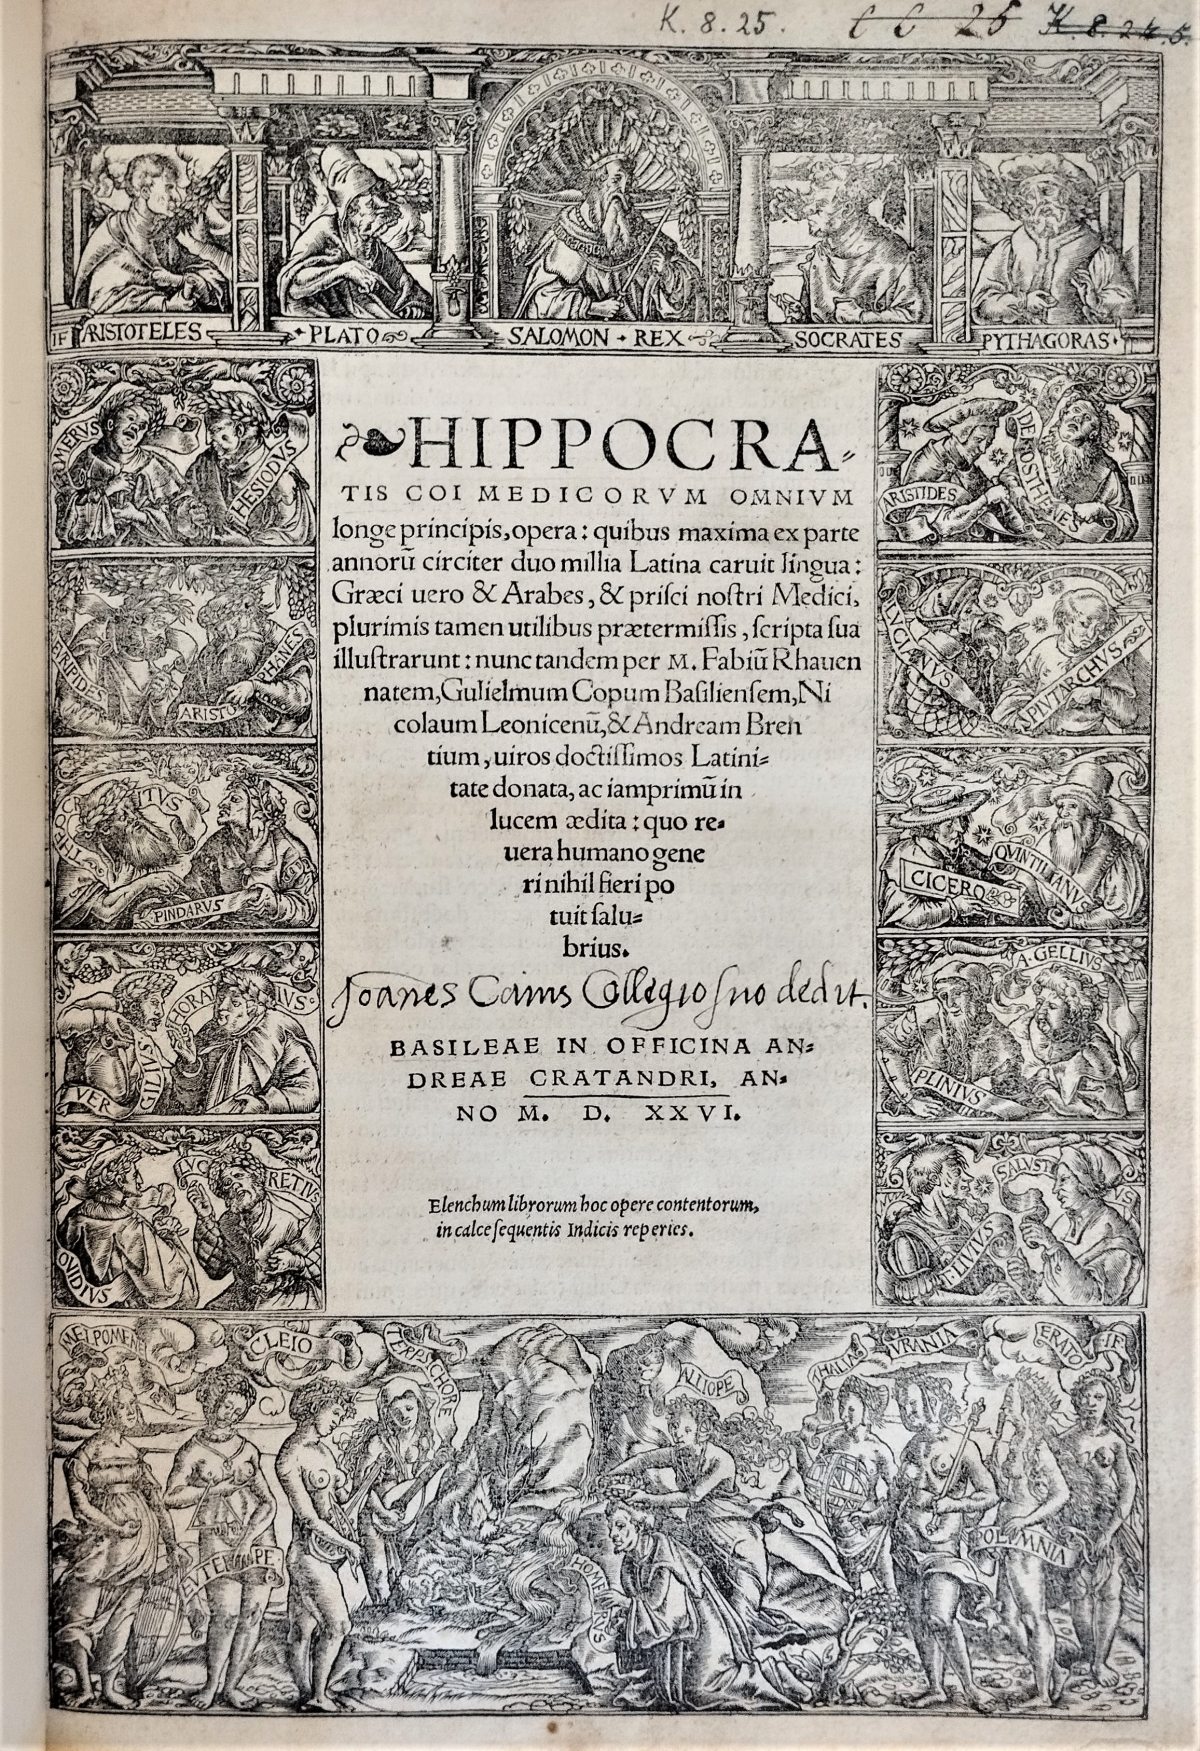 Woodcut title page of the book "Hippocratis Coi medicorum omnium longe principis, opera" (1526) with a handwritten inscription that records donation by John Caius. 